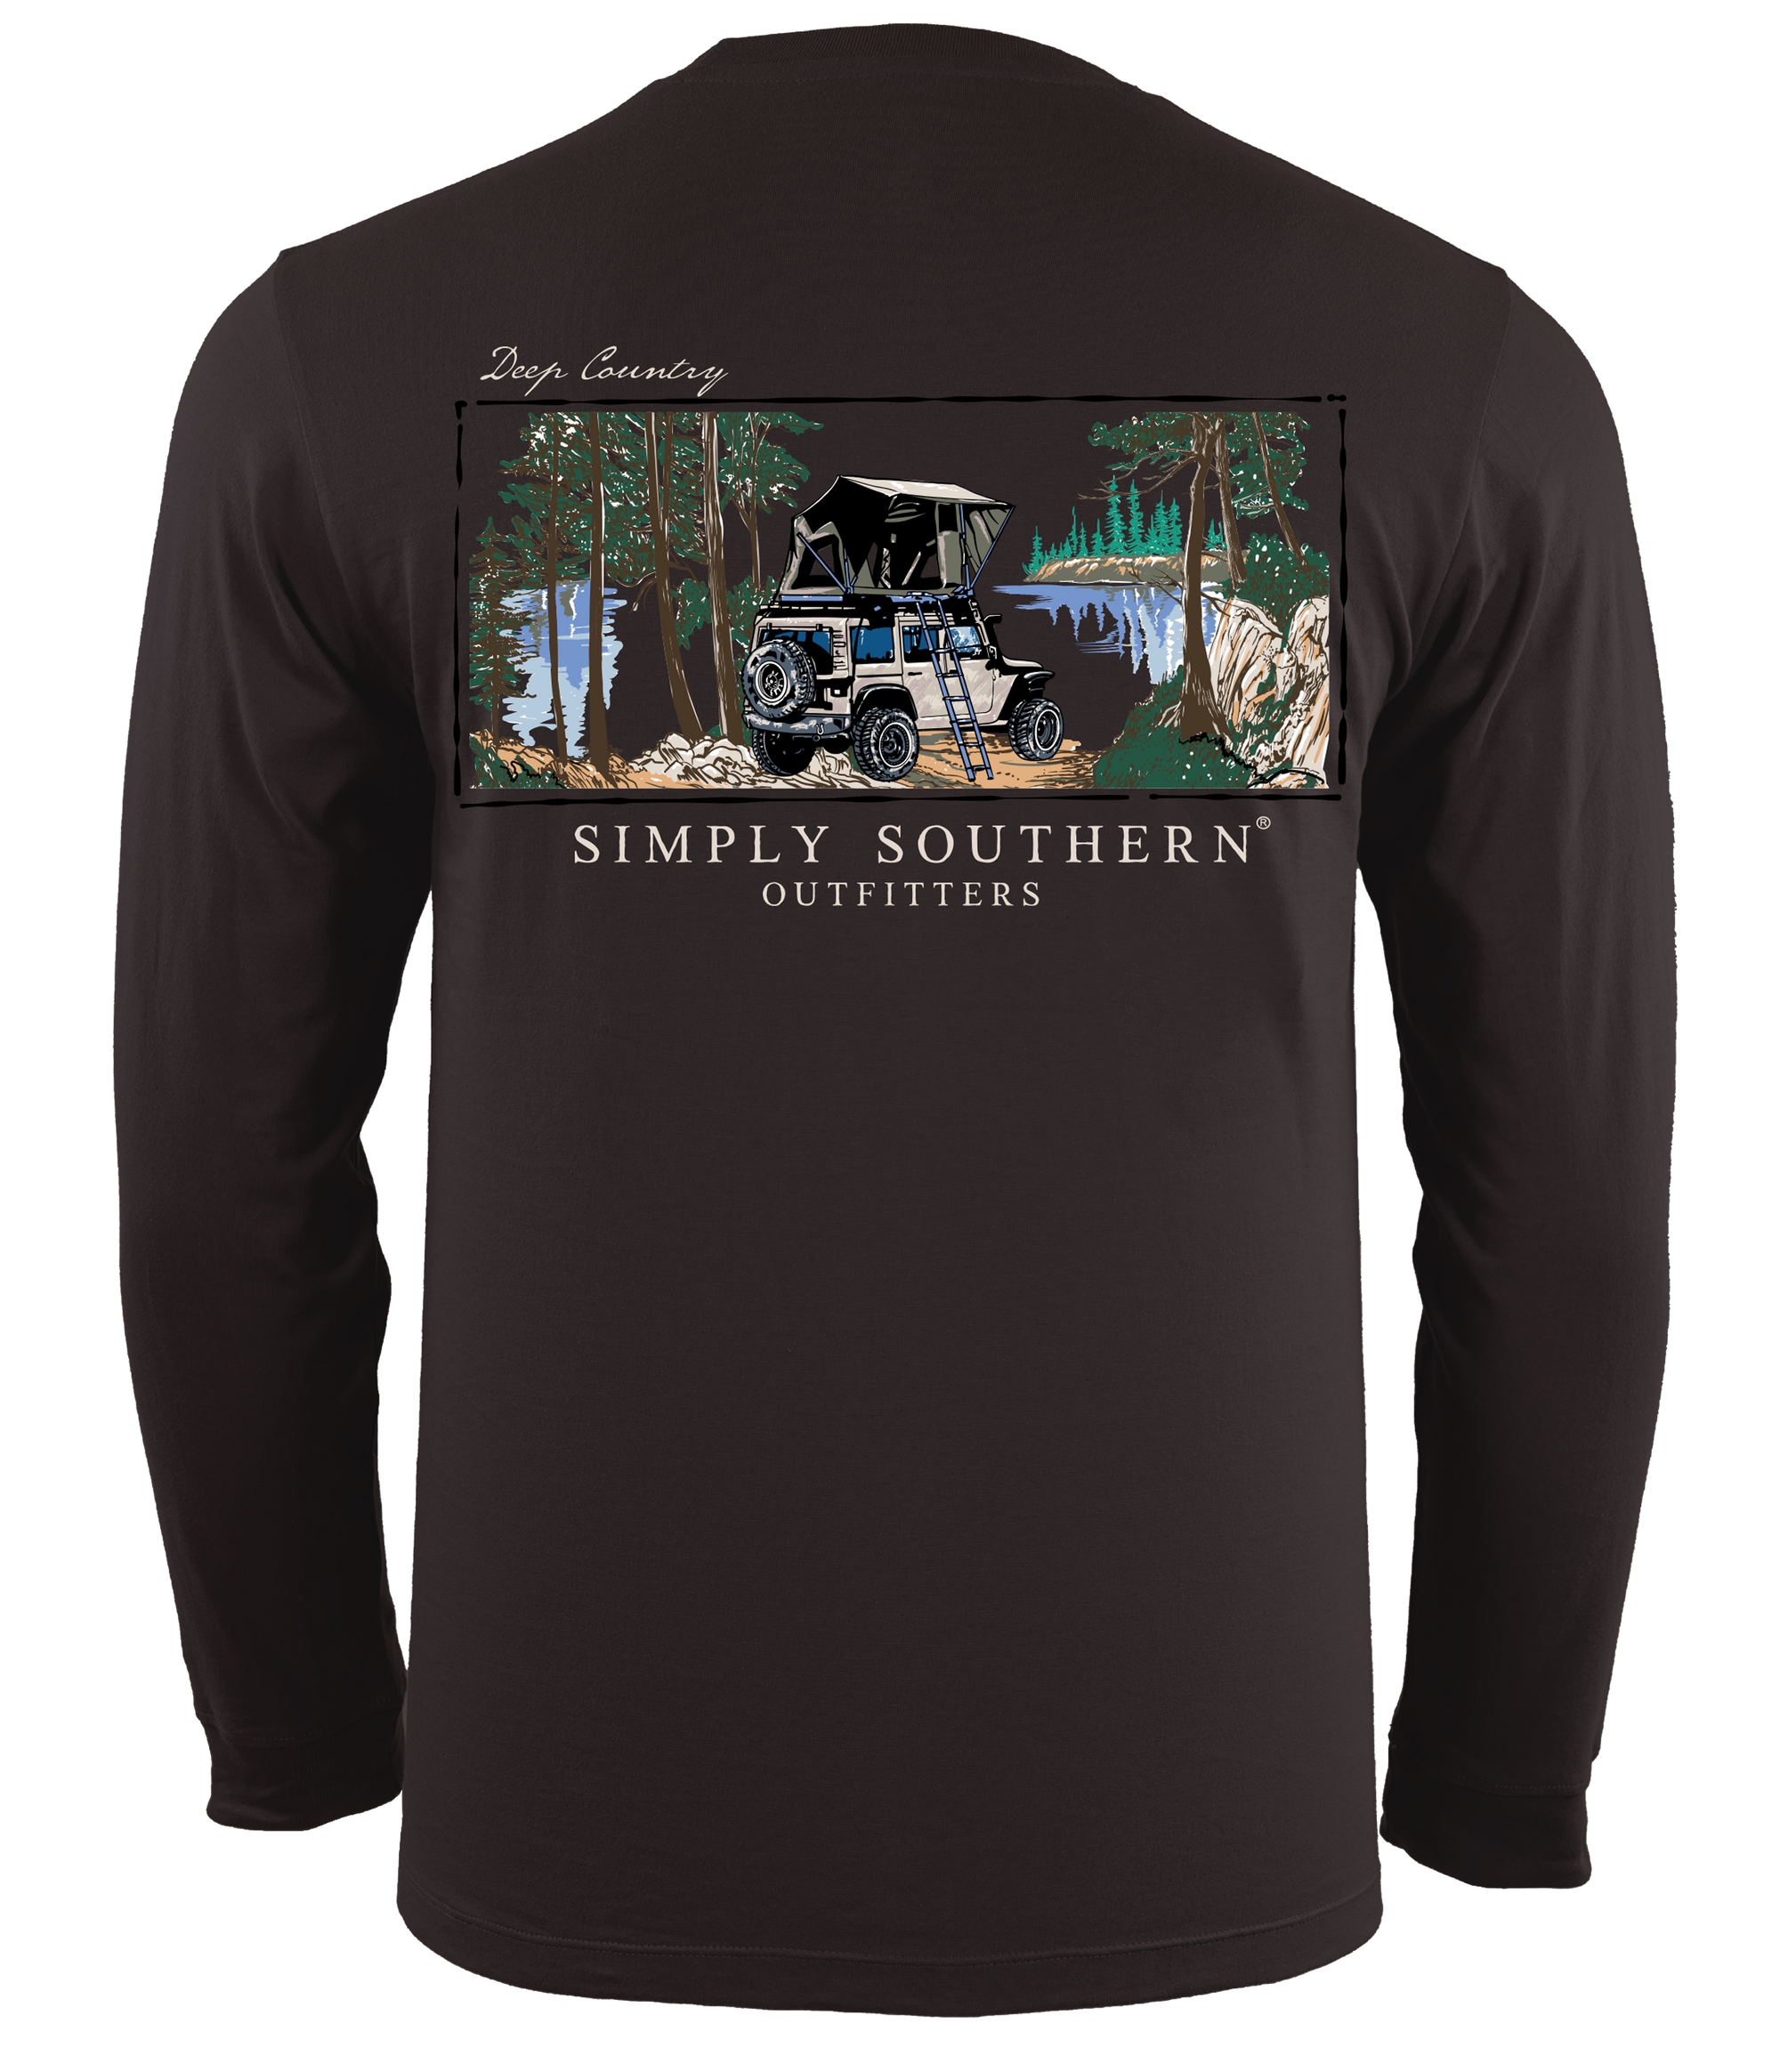 SALE Simply Southern Deep Country Unisex Long Sleeve T-Shirt